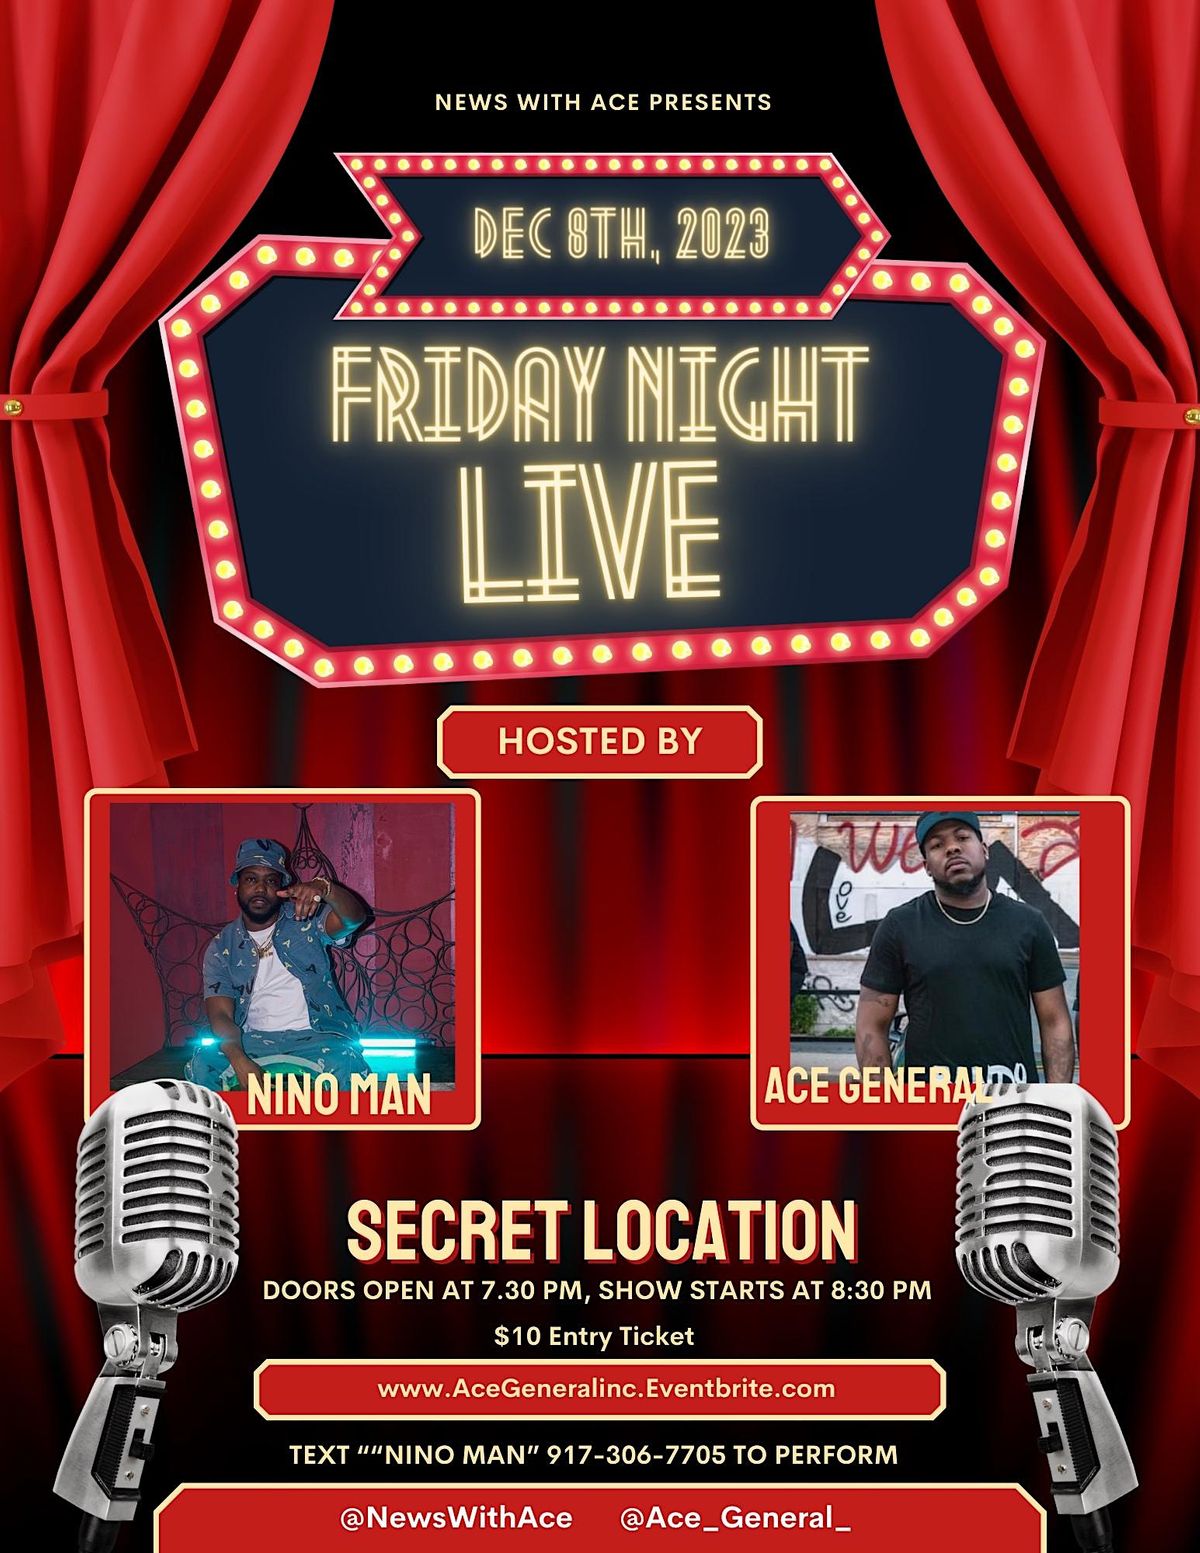 FRIDAY NIGHT LIVE CONCERT HOSTED BY NINO MAN